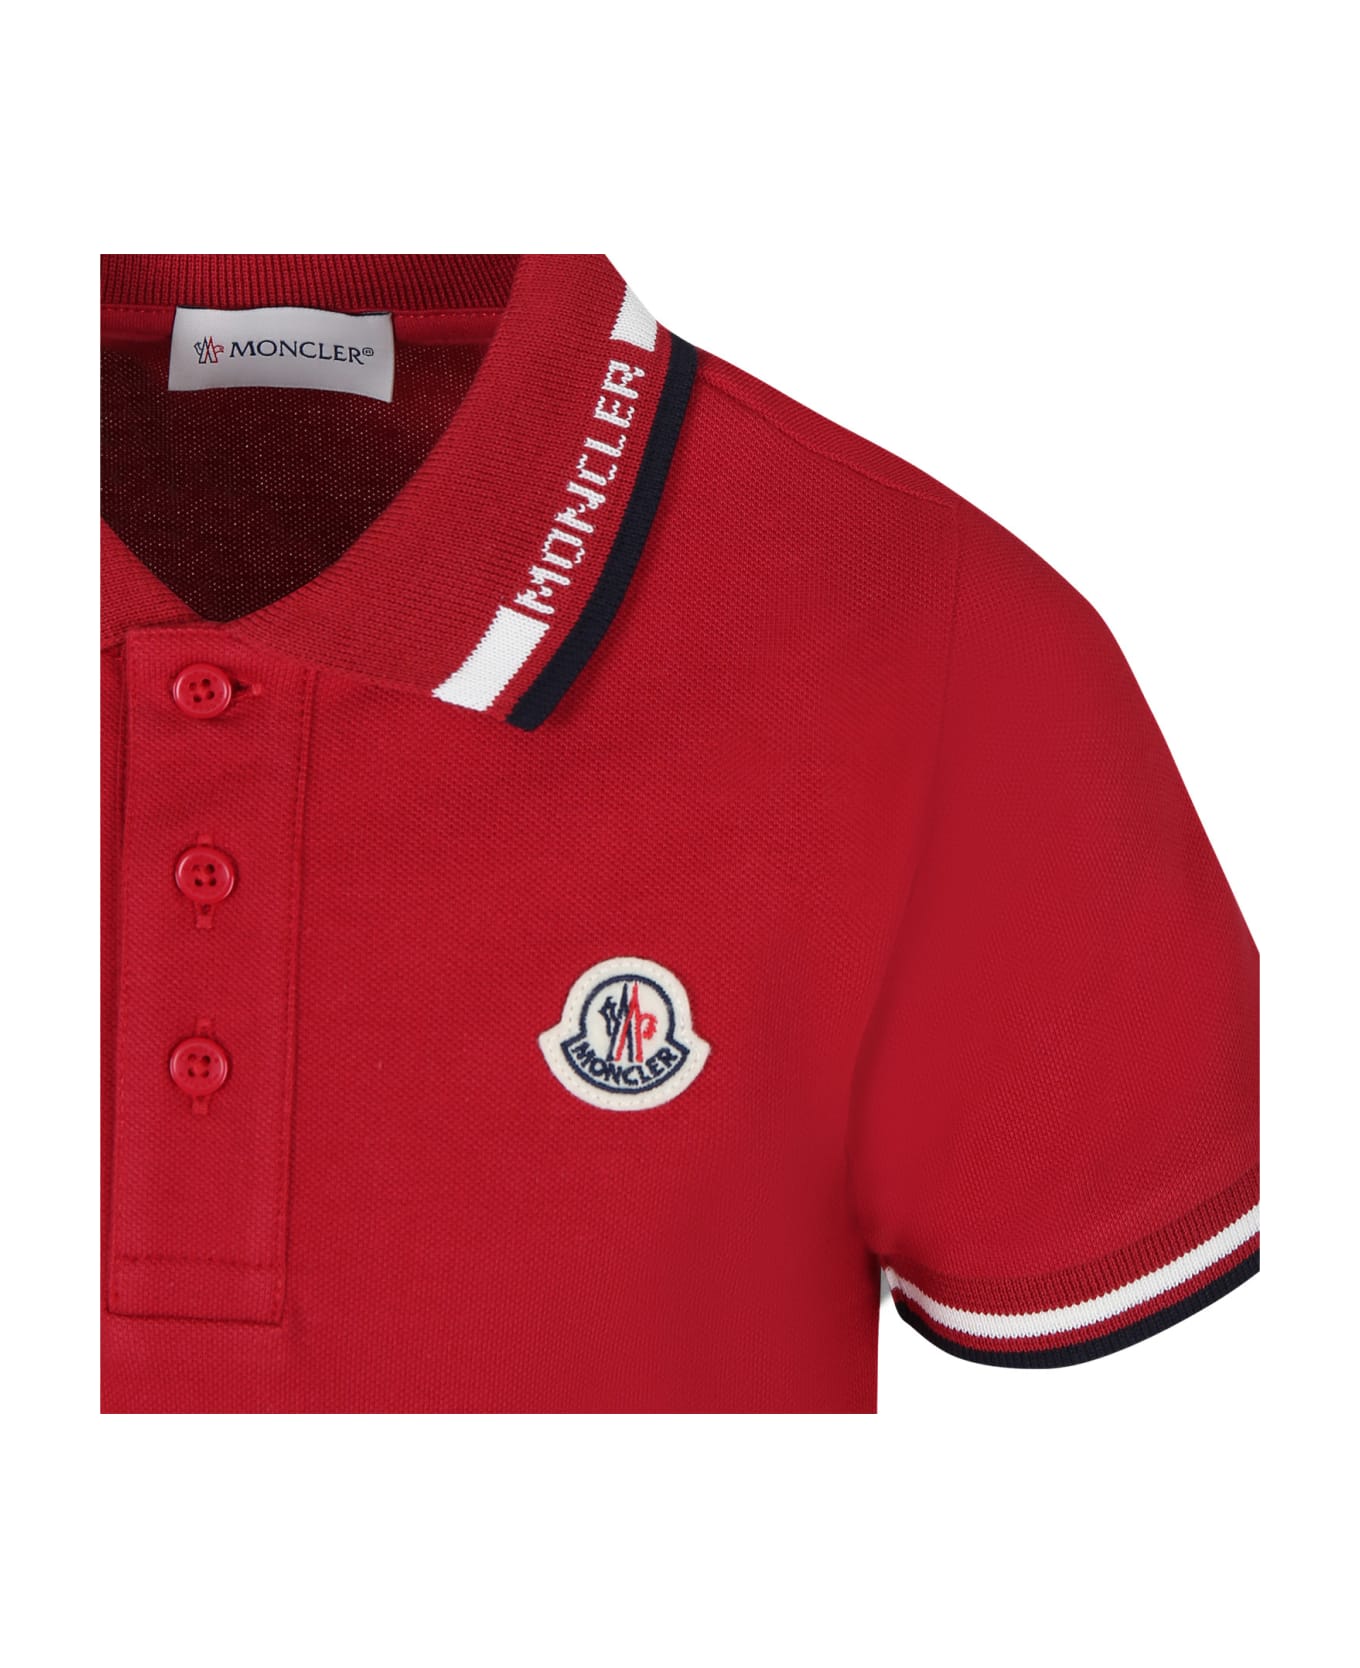 Moncler Red Polo Shirt For Boy With Logo - Red